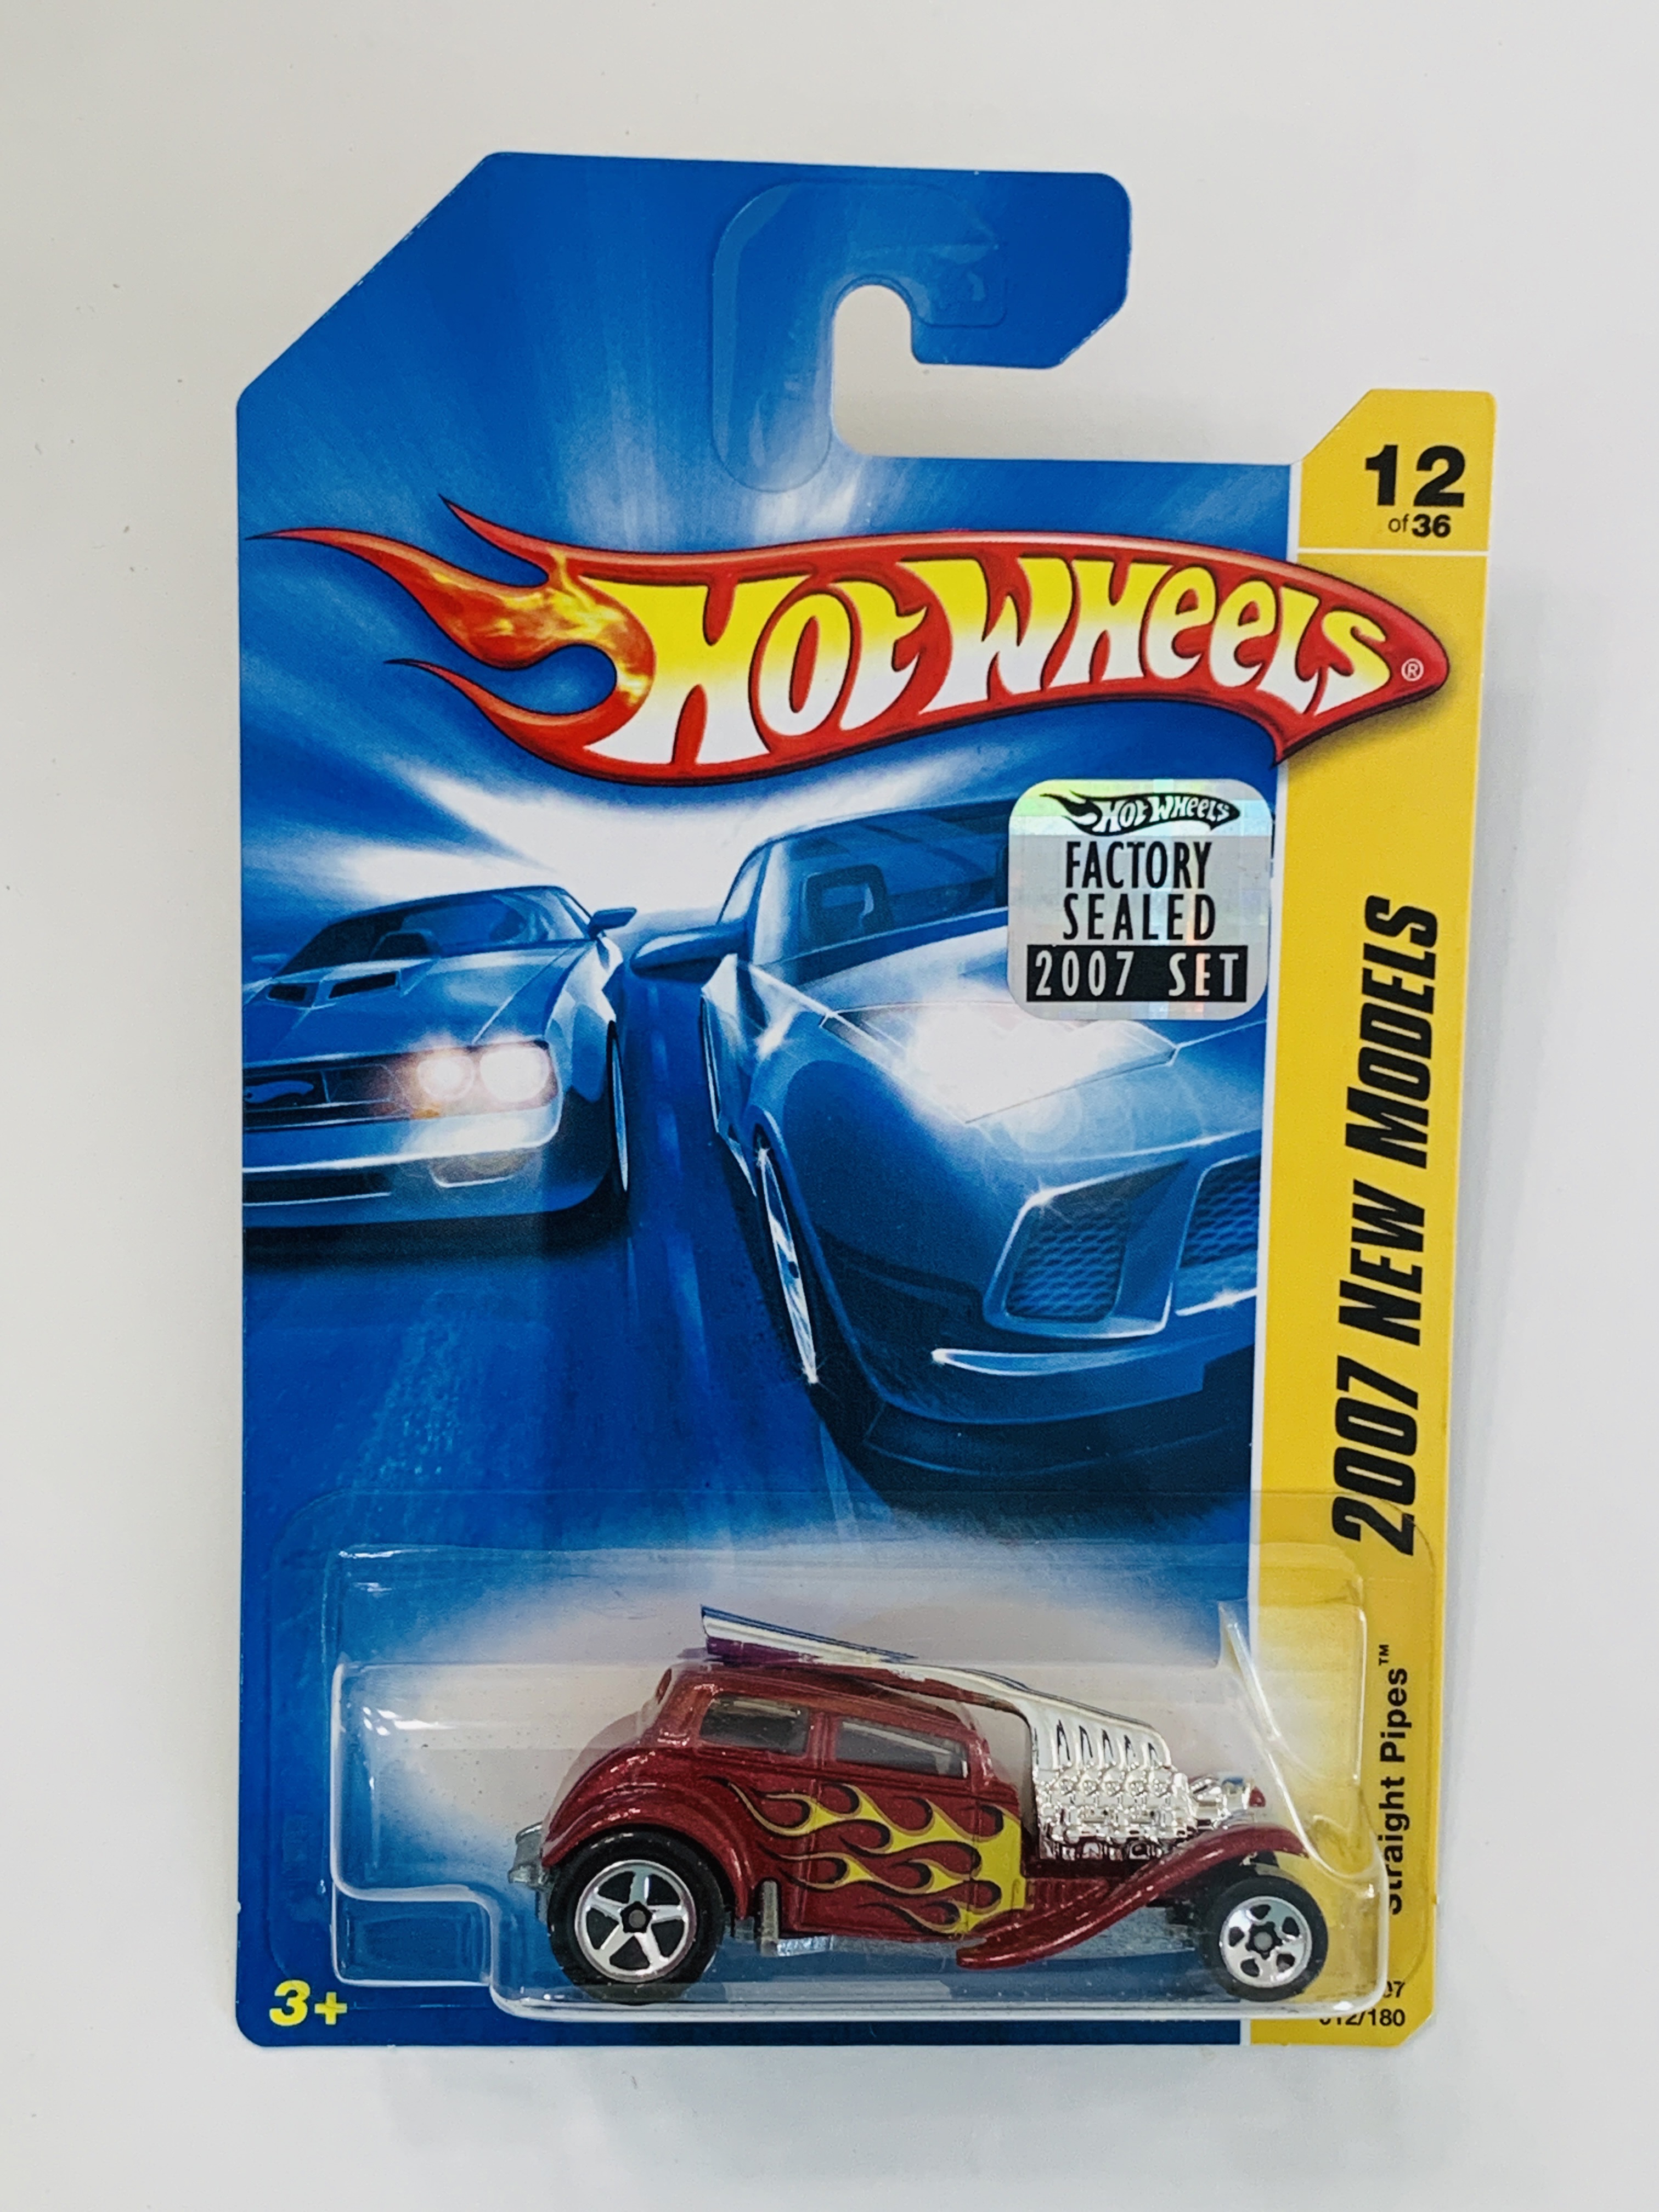 Hot Wheels 2007 Factory Set #012 Straight Pipes - Red